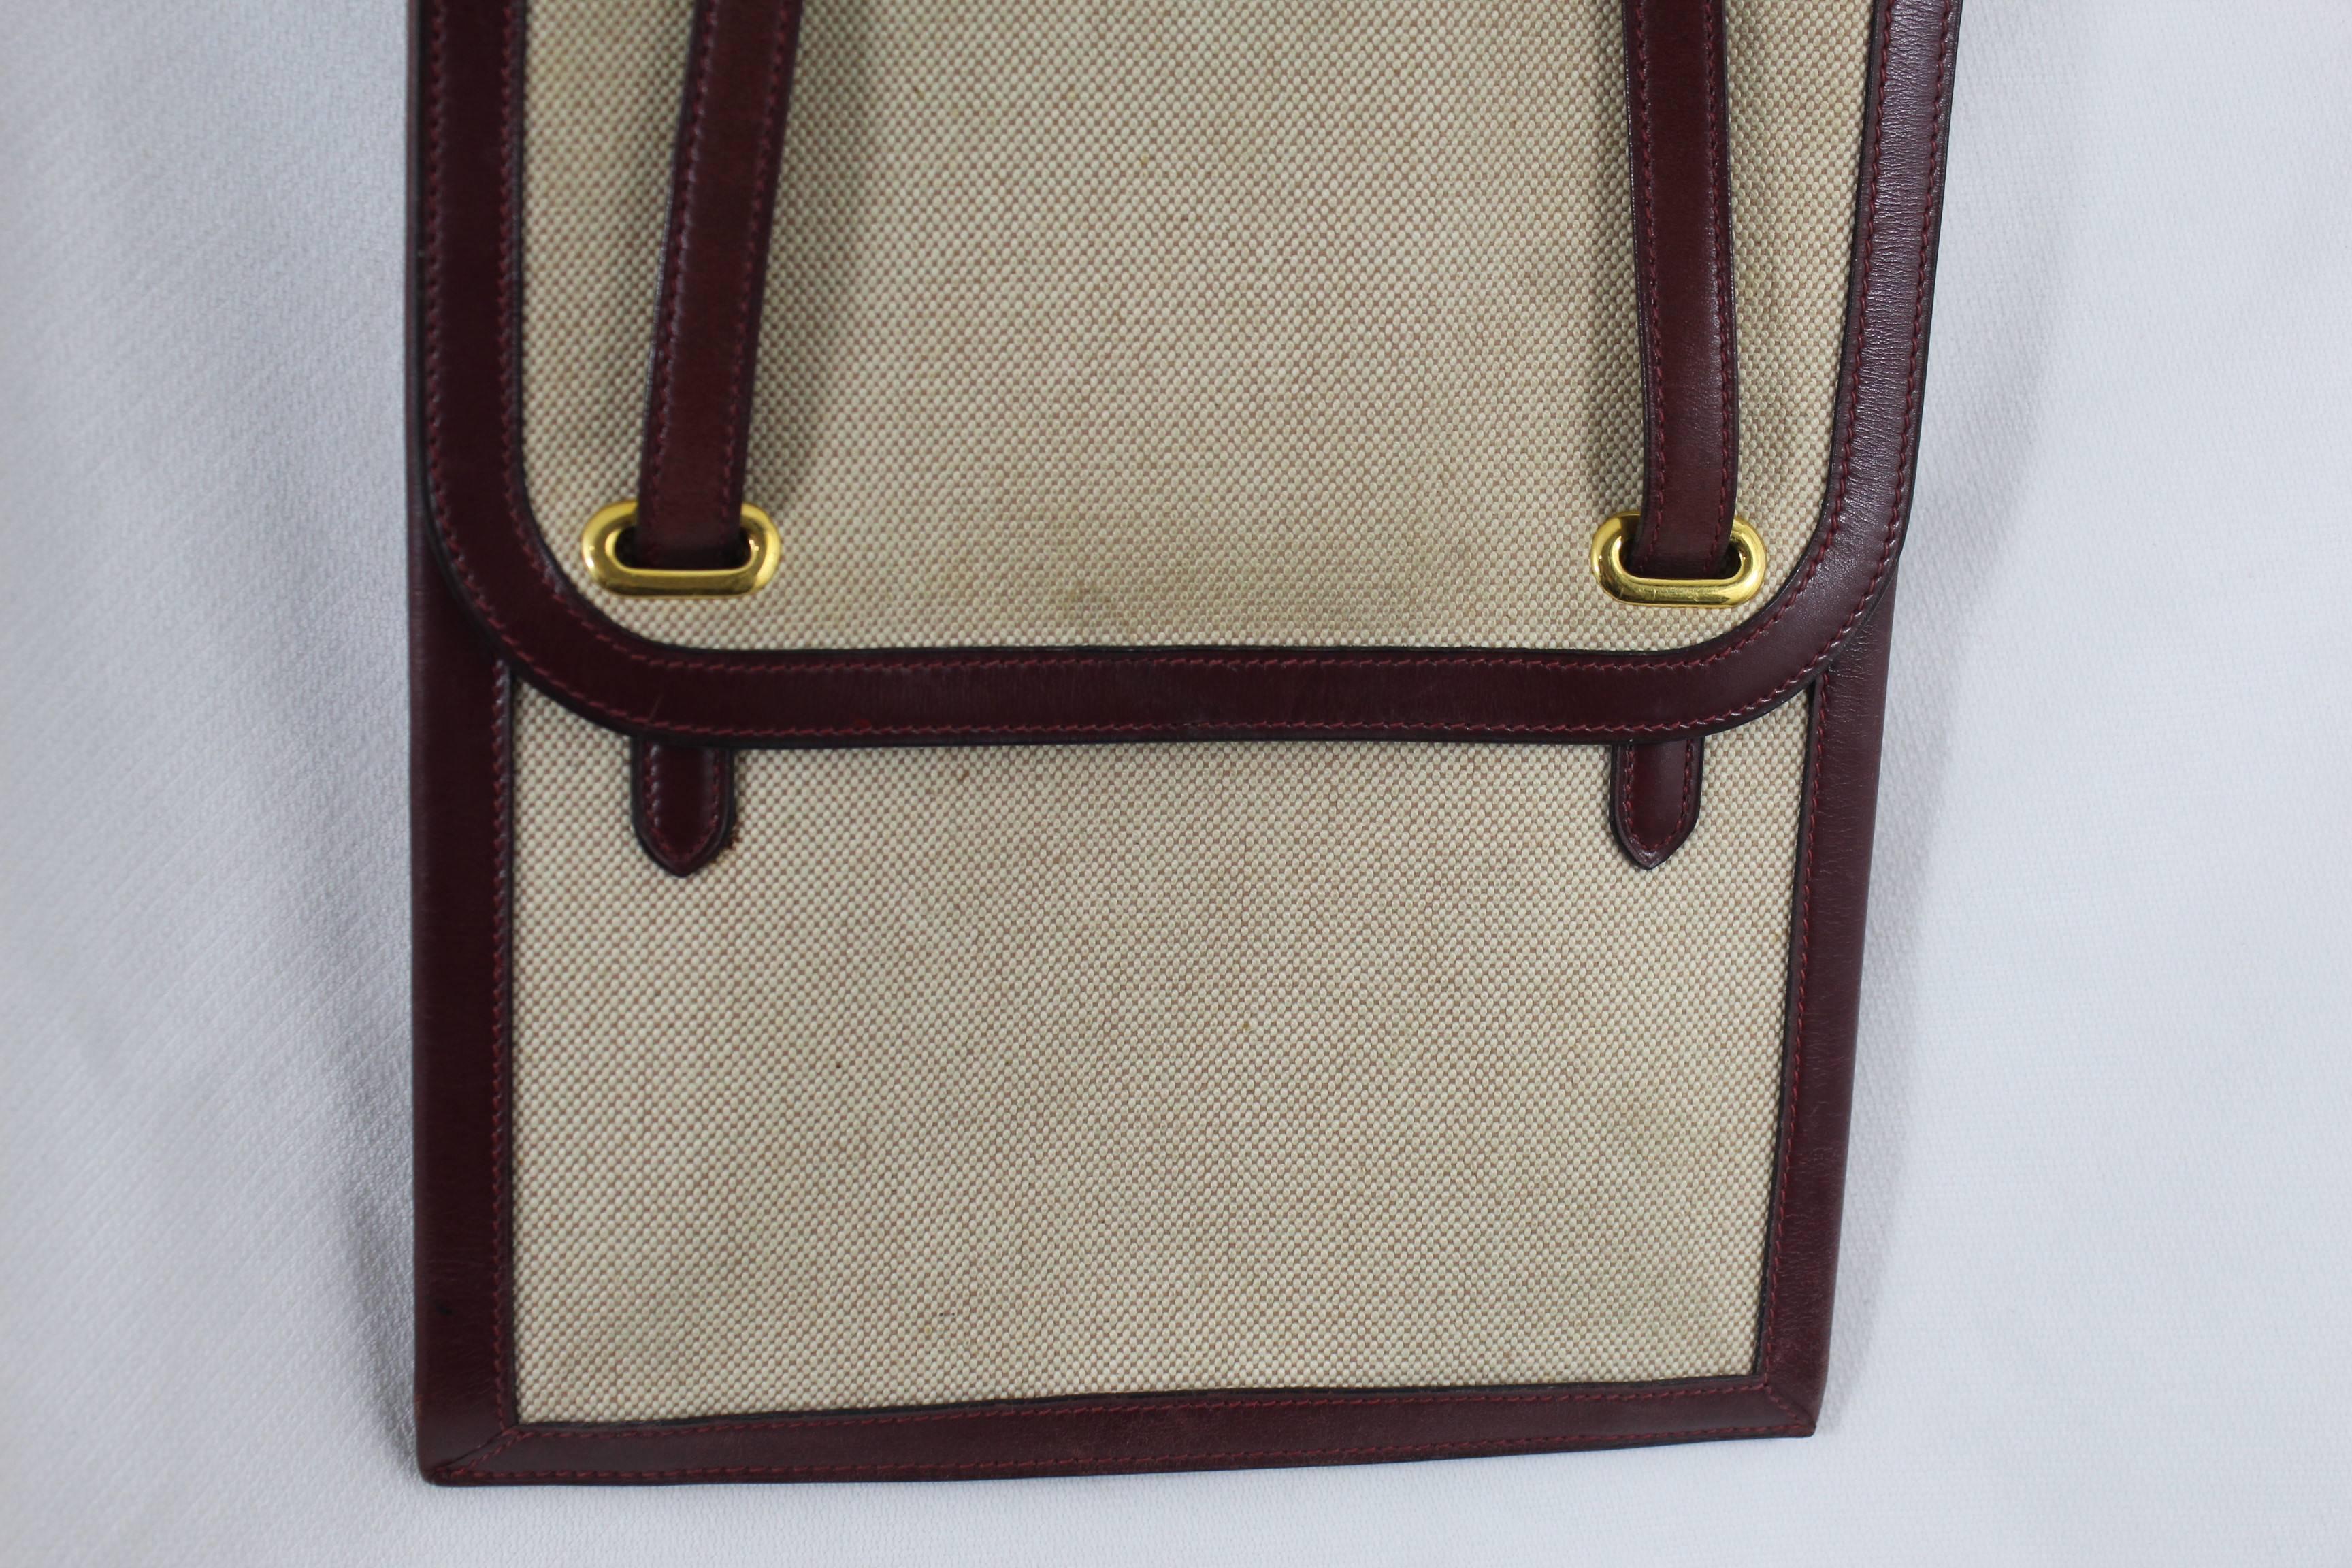 Rare hermes Vintage canvas and leather bag in burgundy leather. Good condition, rare modele. Bag from 1979 but overall good condition ( some light signs of wear in the canvas)

leather in good conditon.

Inner all in leather 